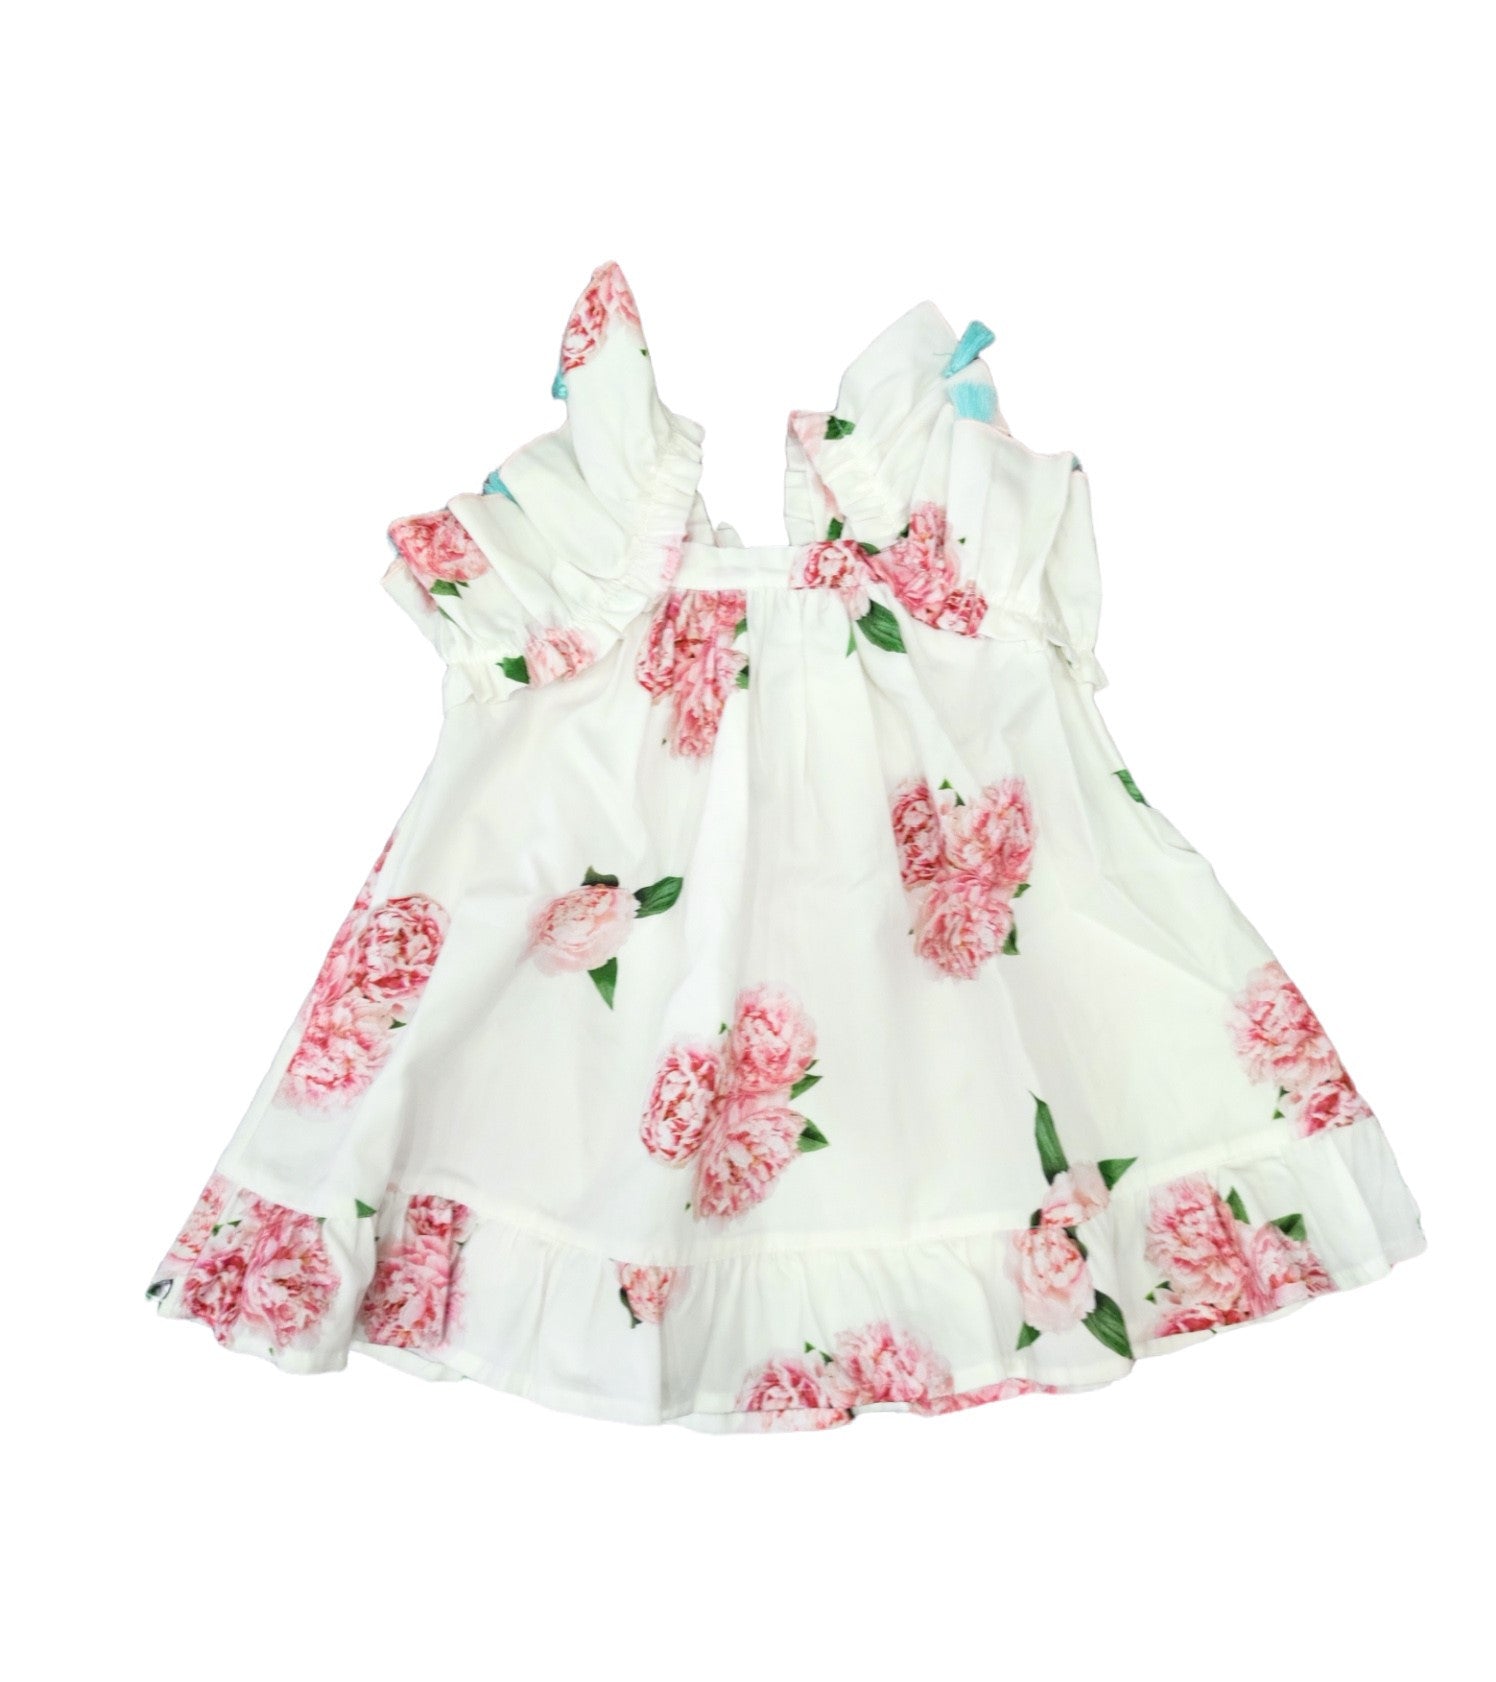 Vestito In Cotone Con Fantasia Floreale E Maniche Volant Bambina PHY CLOTHING 22060 - PHY CLOTHING - LuxuryKids